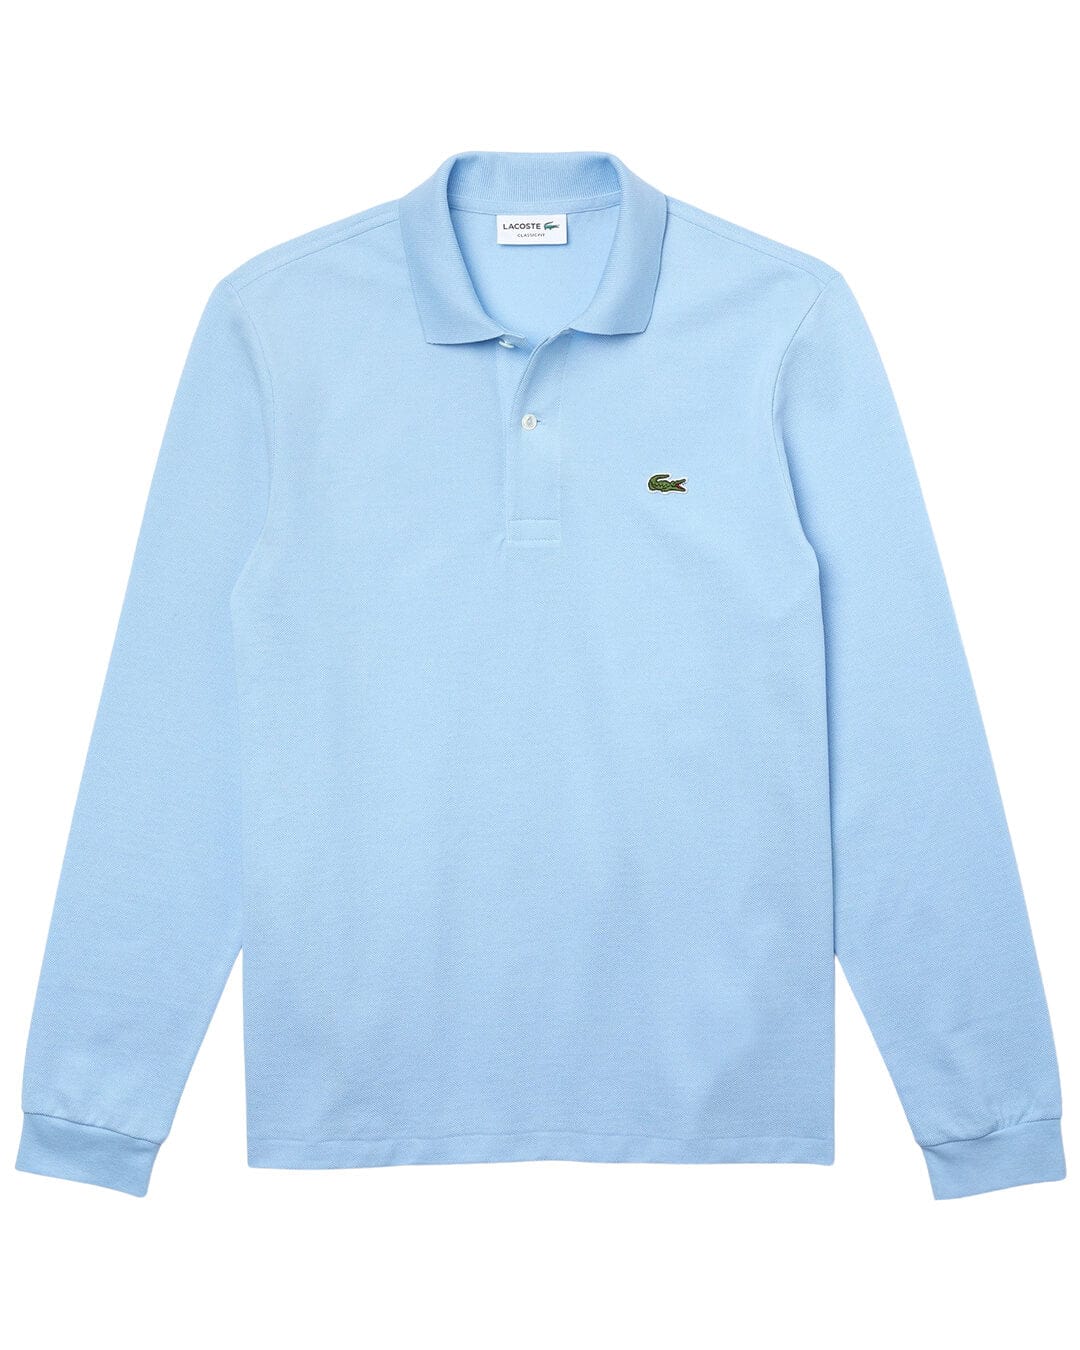 Lacoste Polo Shirts Lacoste Long Sleeved Classic Fit Blue Polo Shirt